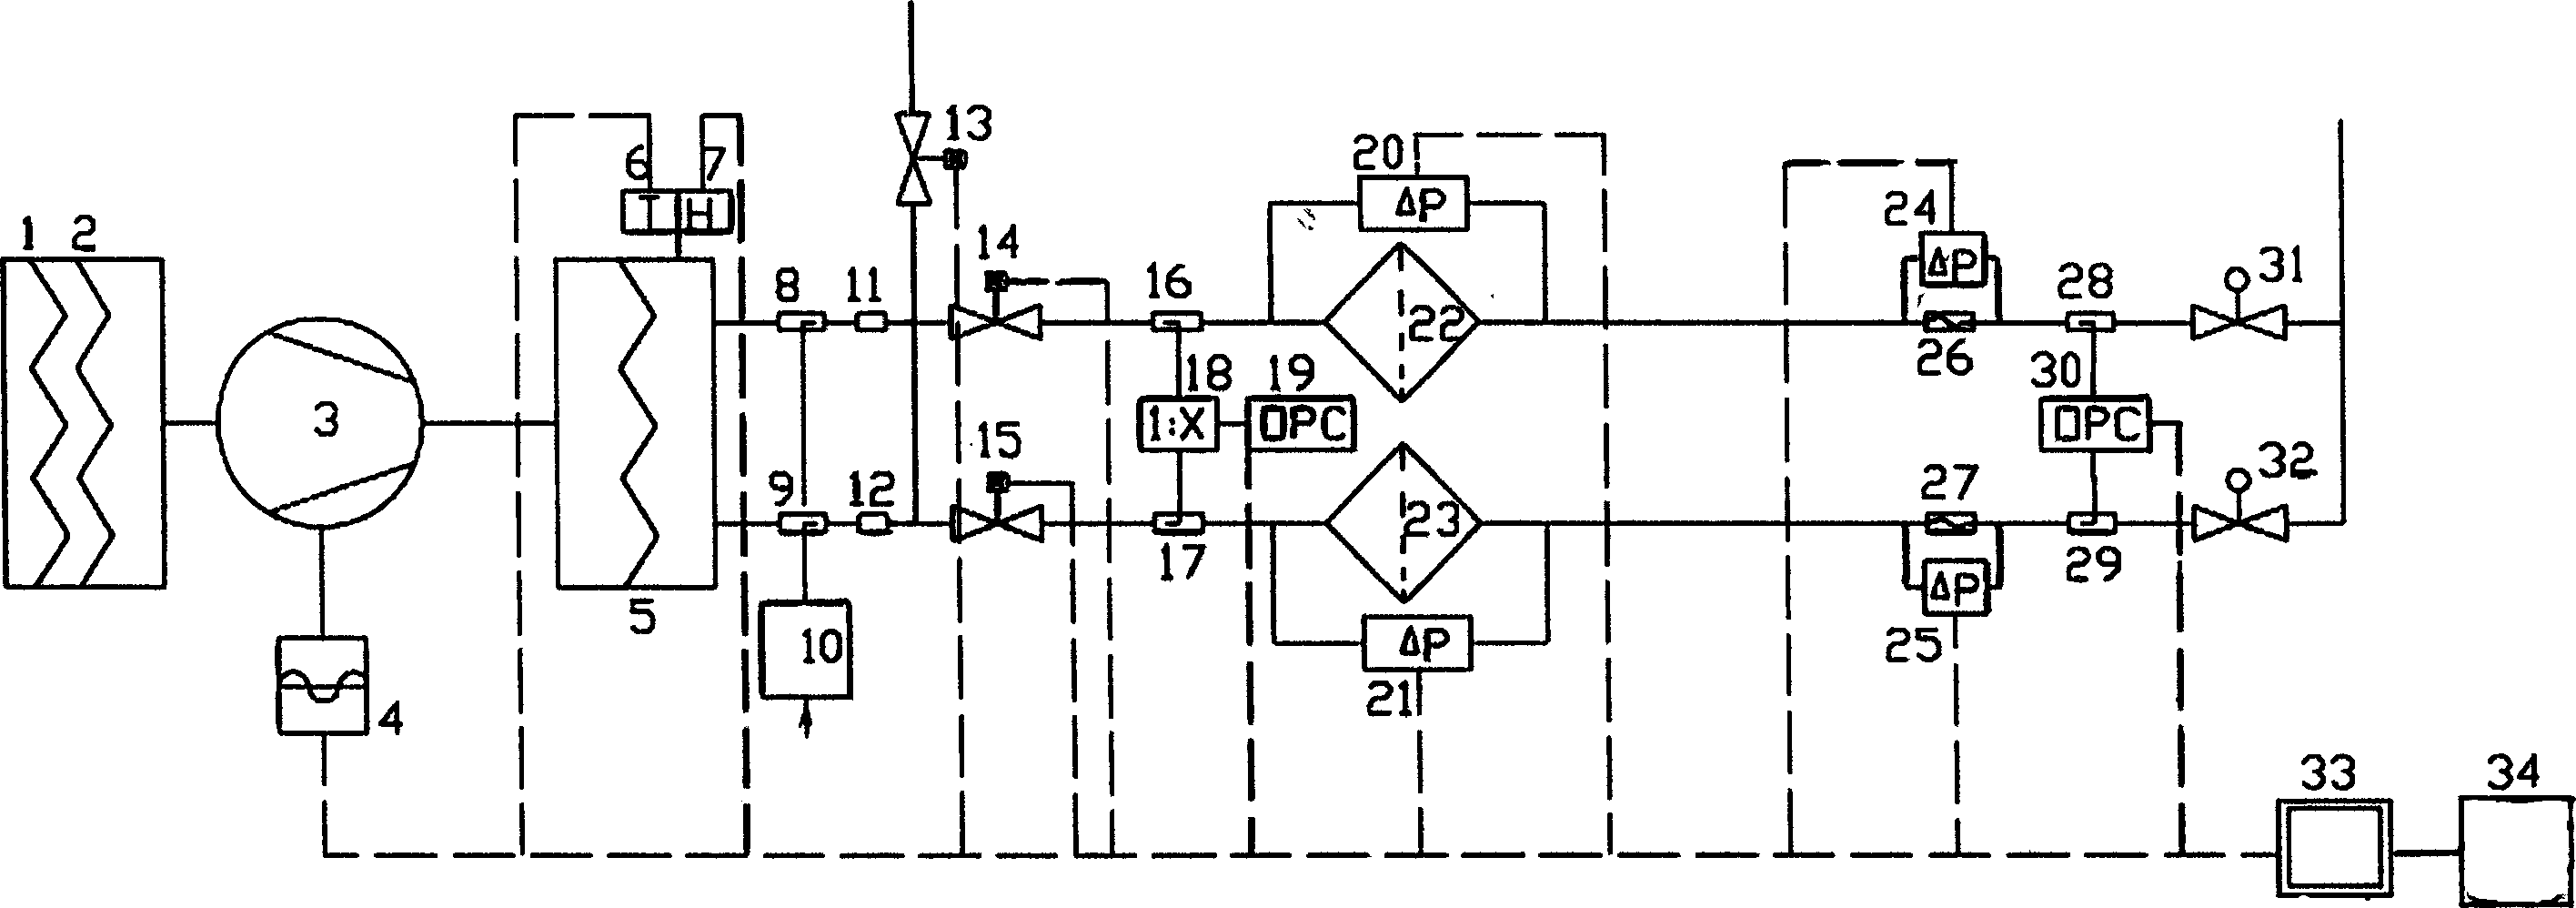 Filter-efficiency inspection system for efficient and super-efficient air filter